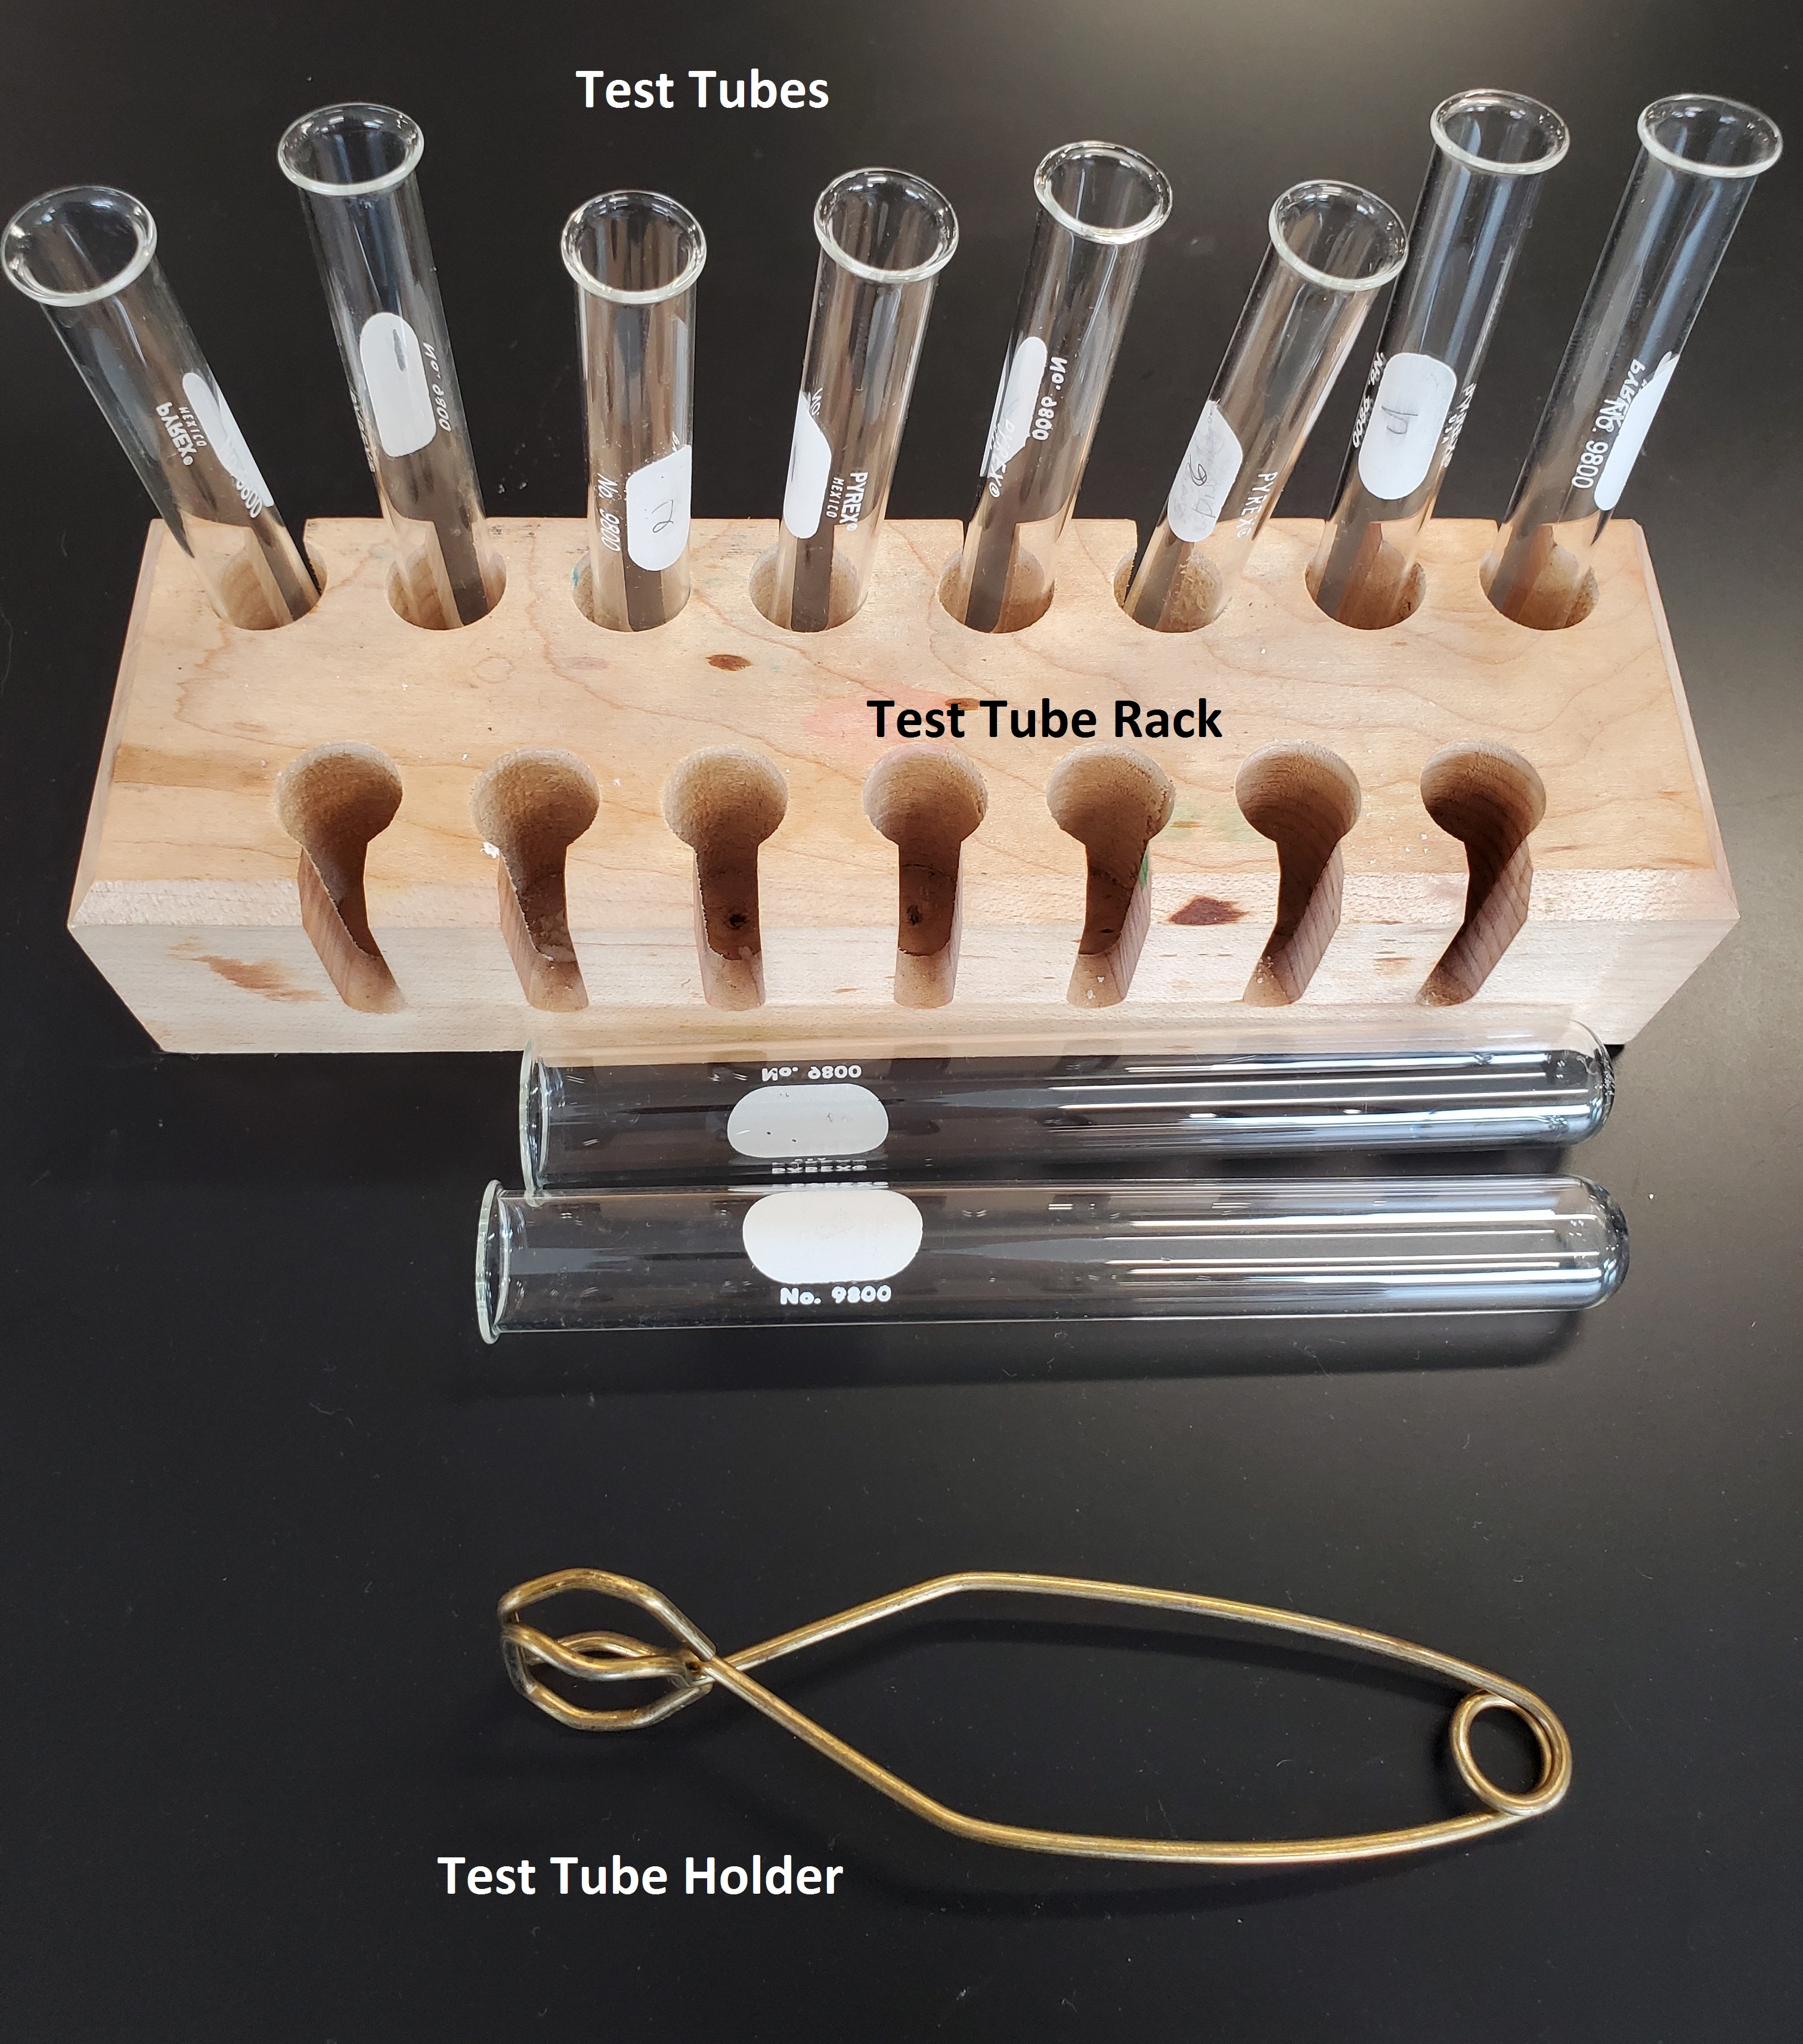 Picture of test tubes, test tube holder, and rack